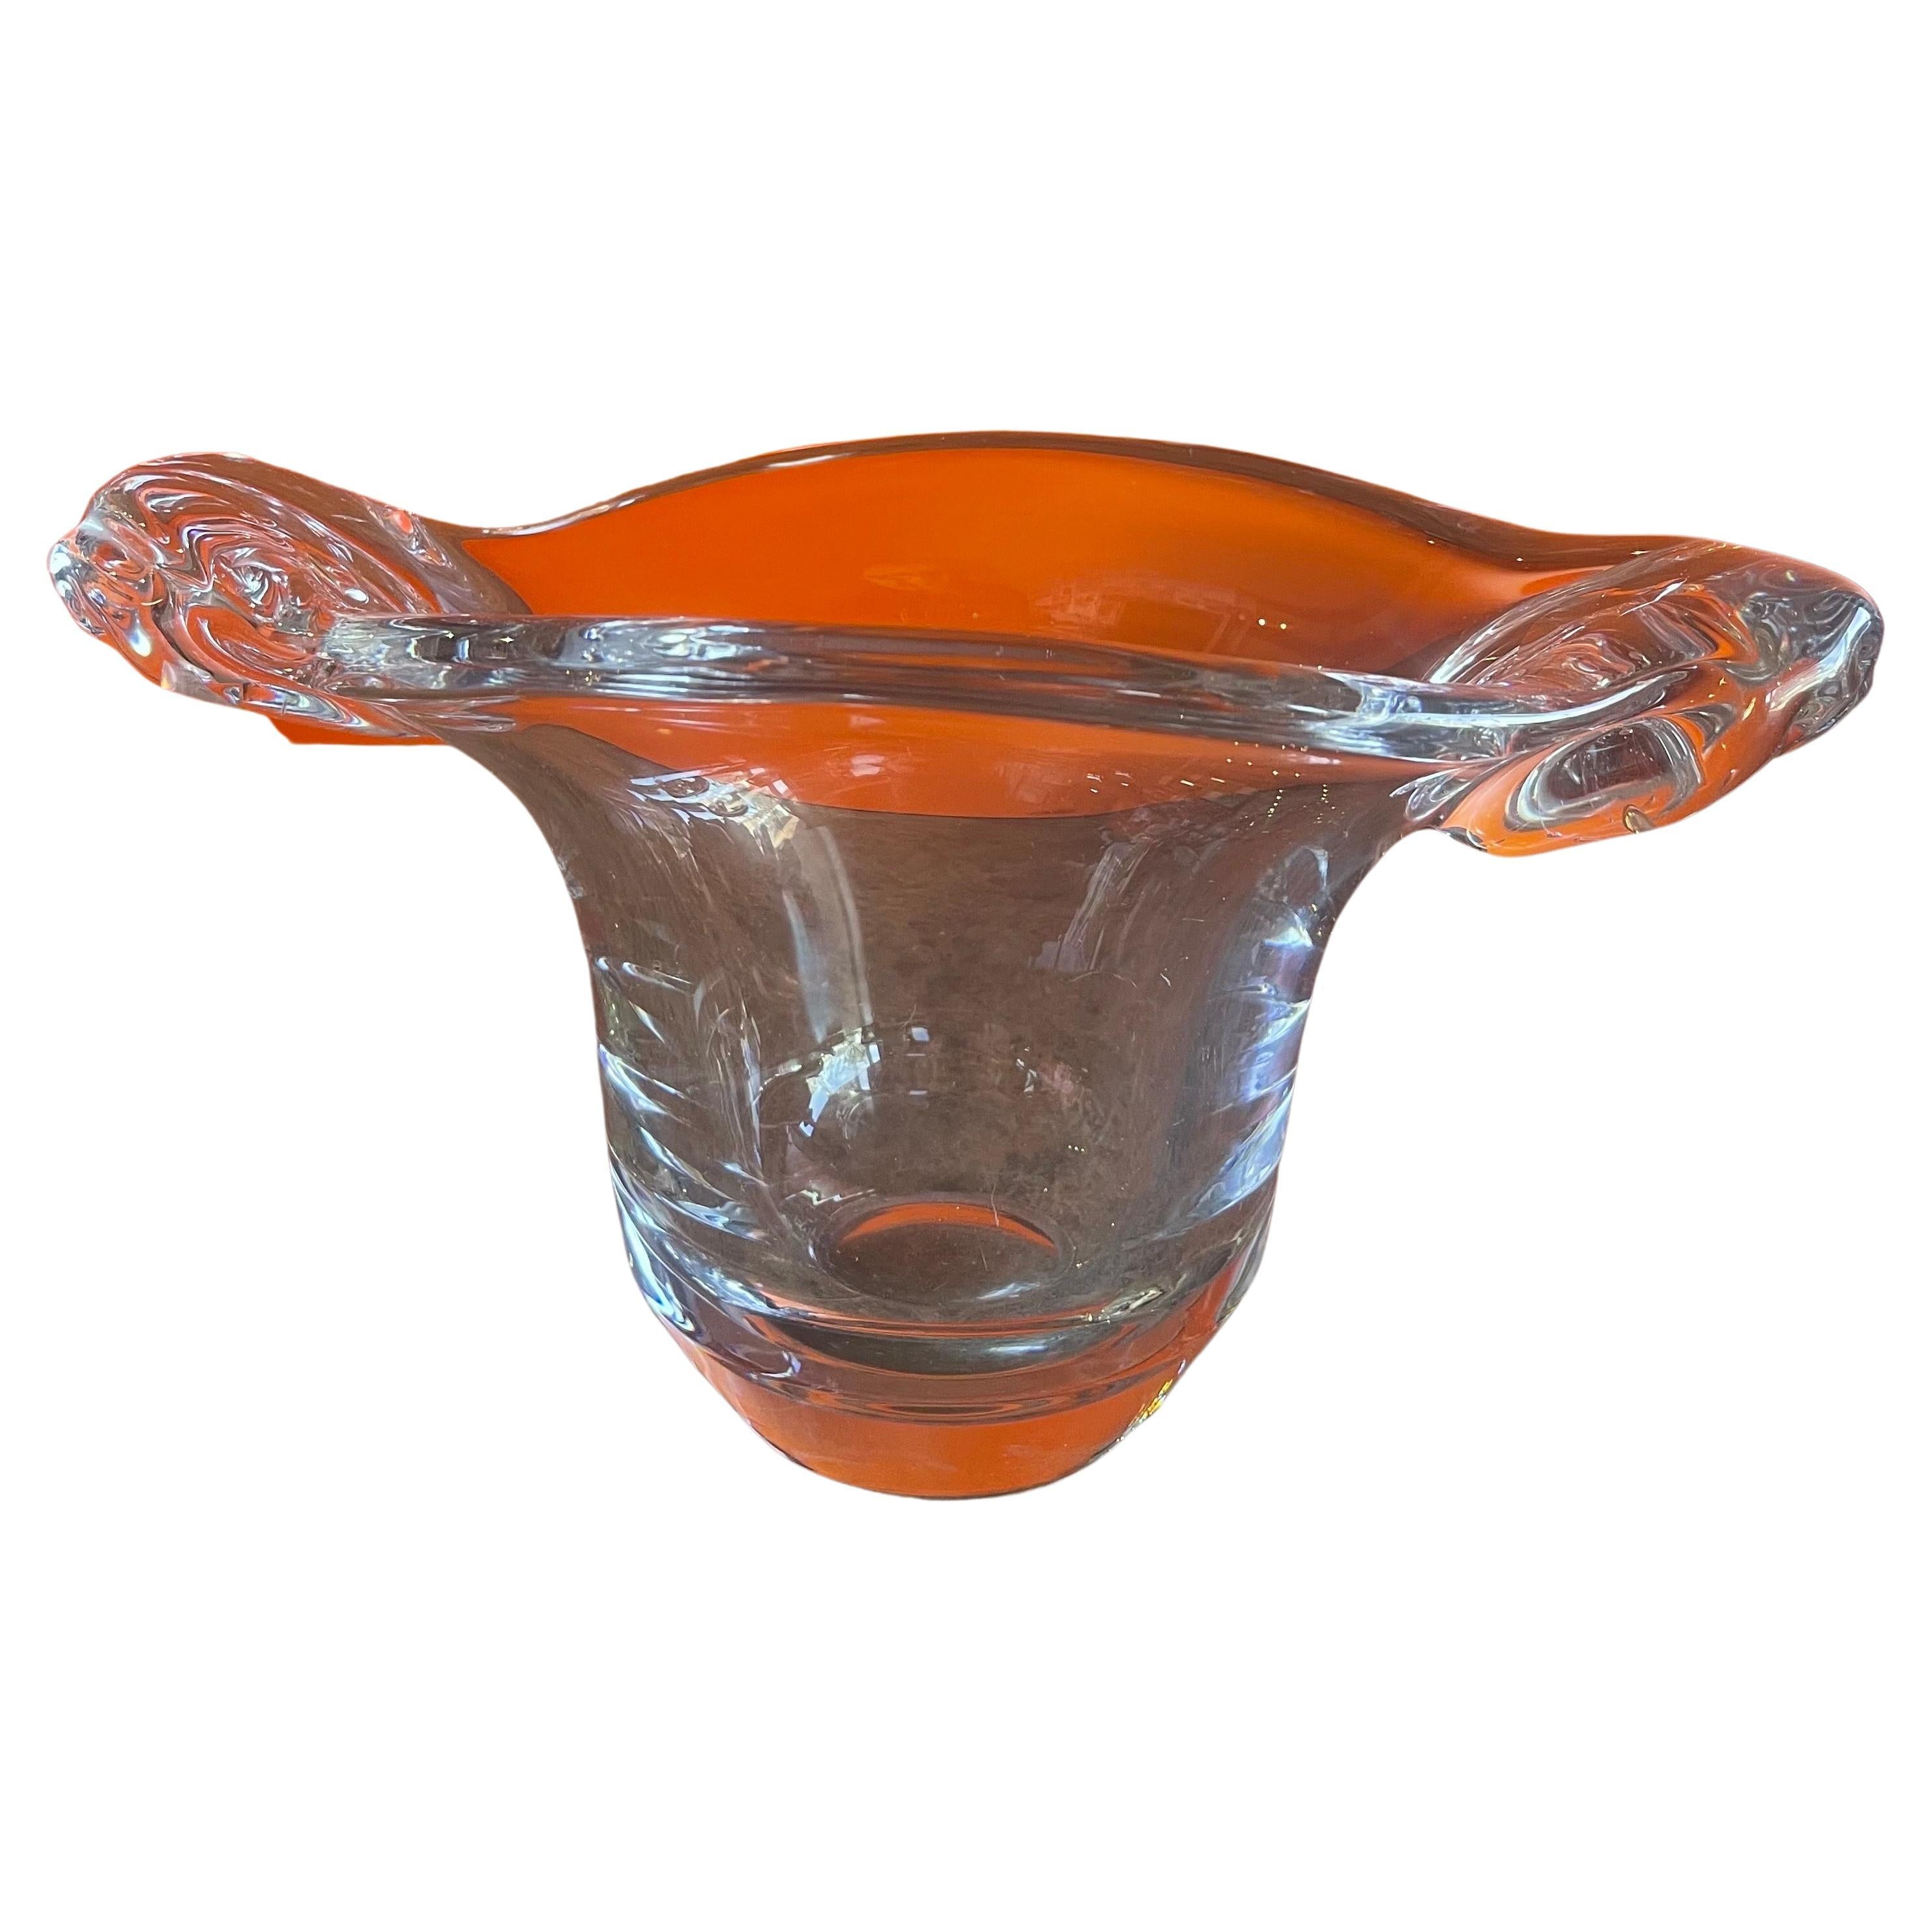 Gorgeous crystal two handle bowl by Daum, France, circa 1970s. The bowl is in very good condition and measures 13.25